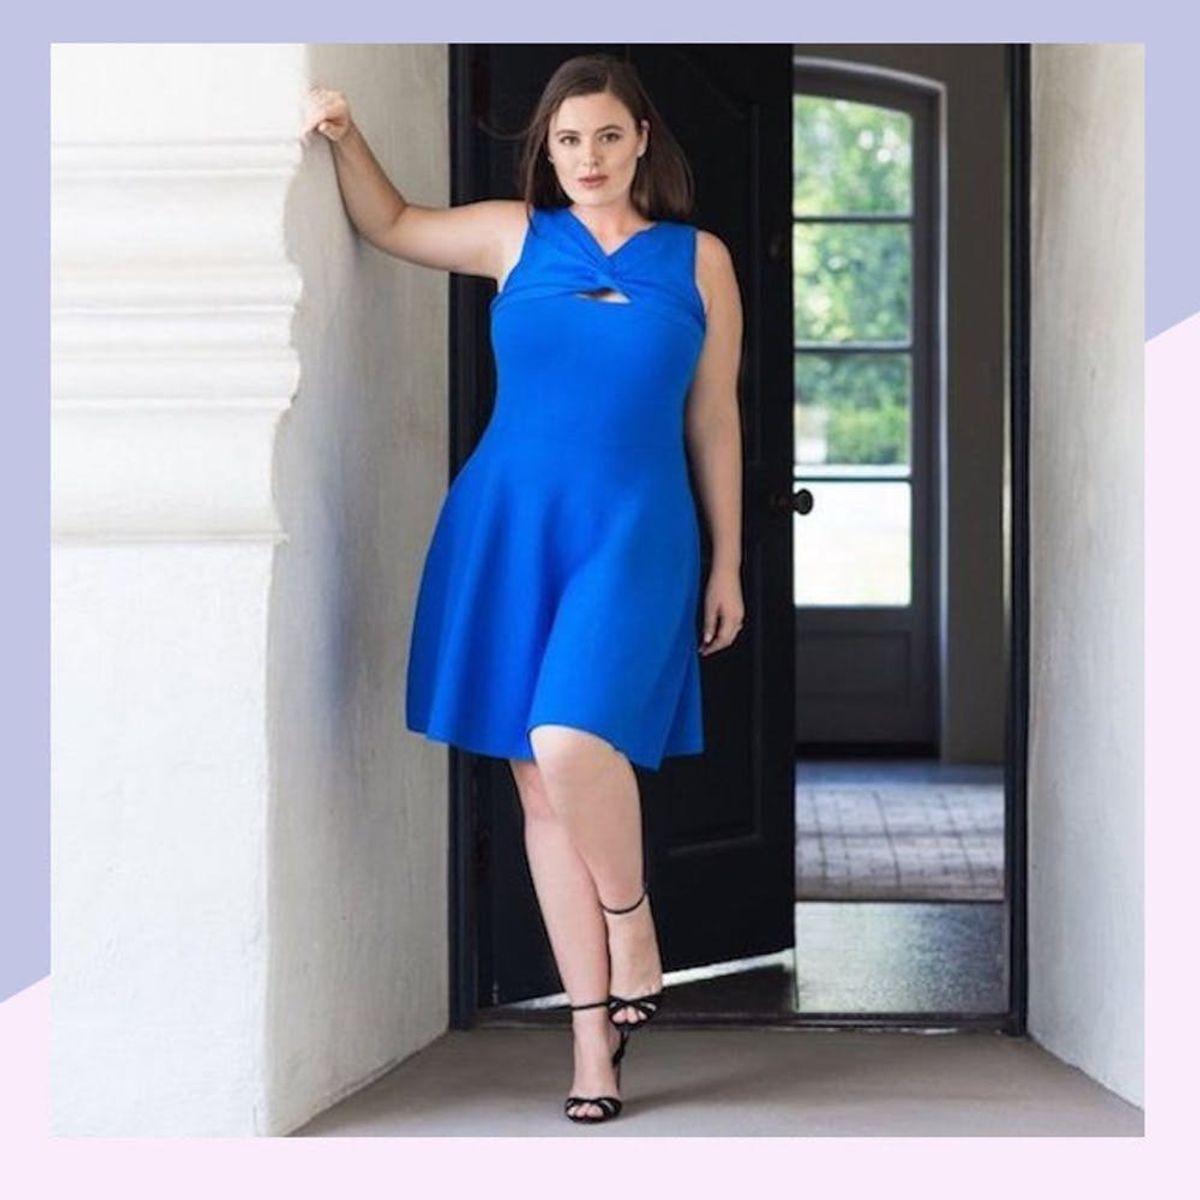 This Luxury E-Tailer Is Redefining Fashion, One Extended Sized Dress at a Time